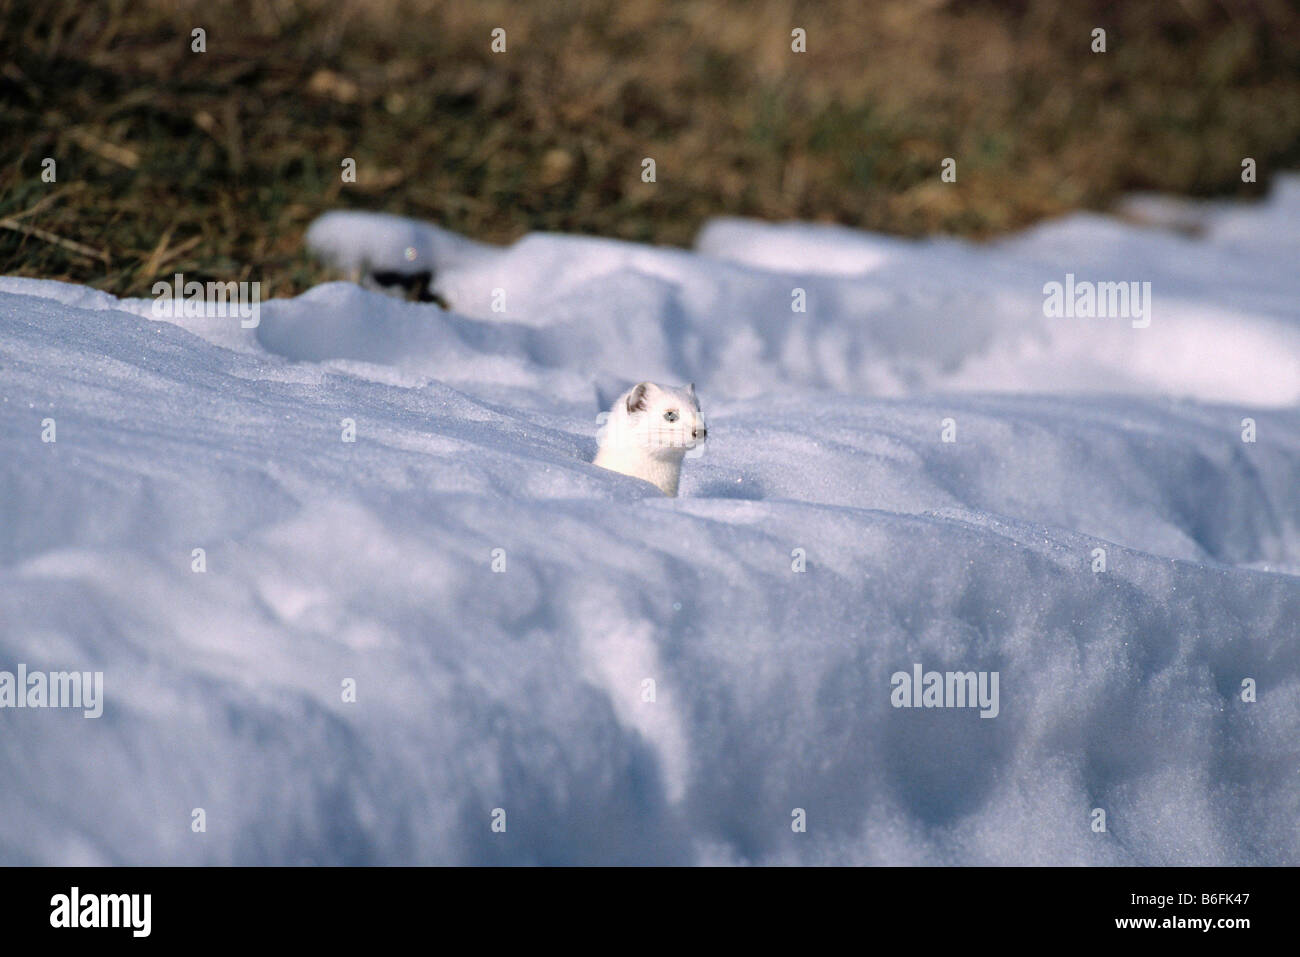 Ermine or Stoat or Short-tailed Weasel (Mustela erminea) in its winter coat in the snow Stock Photo